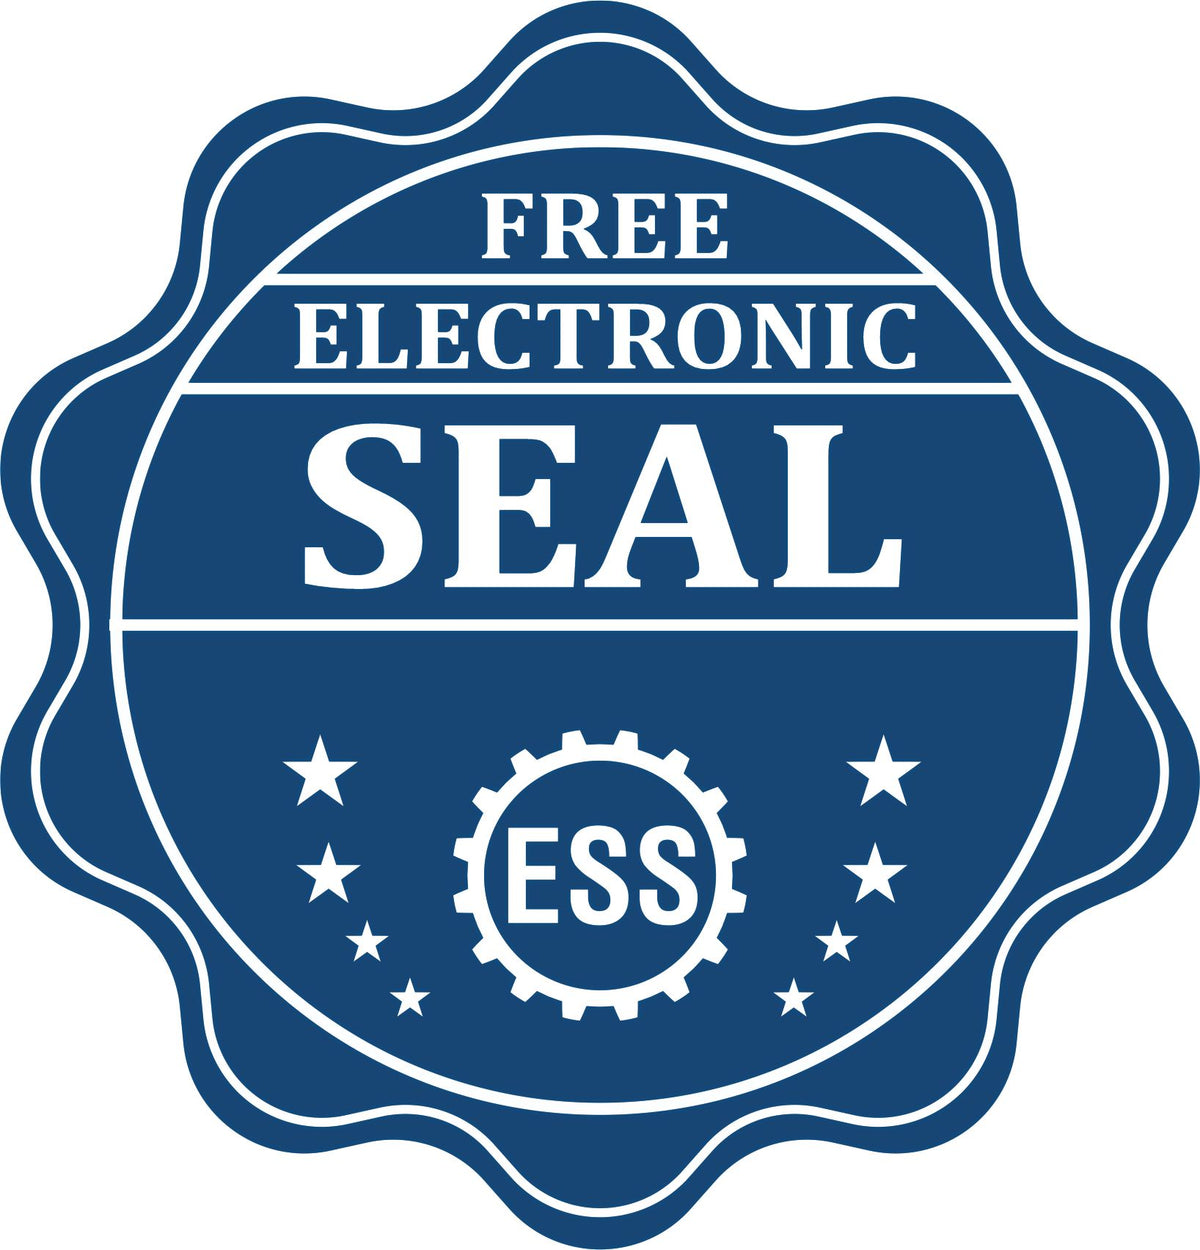 A badge showing a free electronic seal for the Hybrid Virginia Land Surveyor Seal with stars and the ESS gear on the emblem.